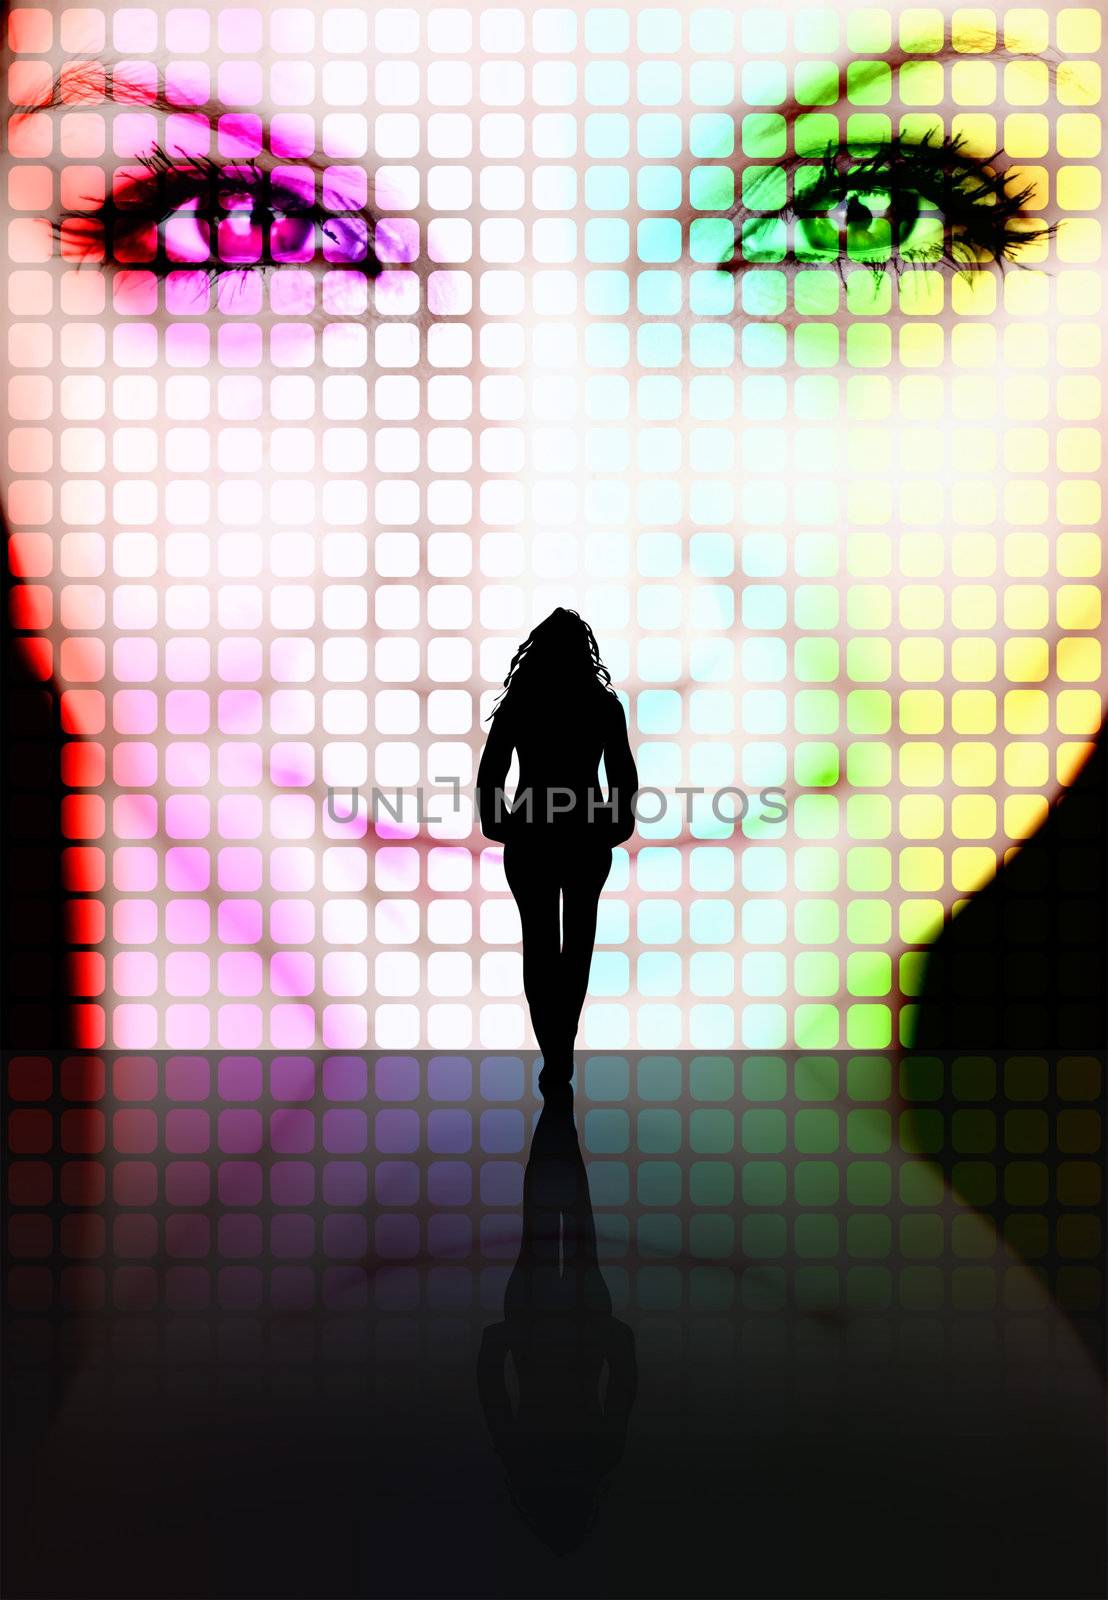 Illustration with a silhouette of a woman looking at another pretty womans face on a screen.